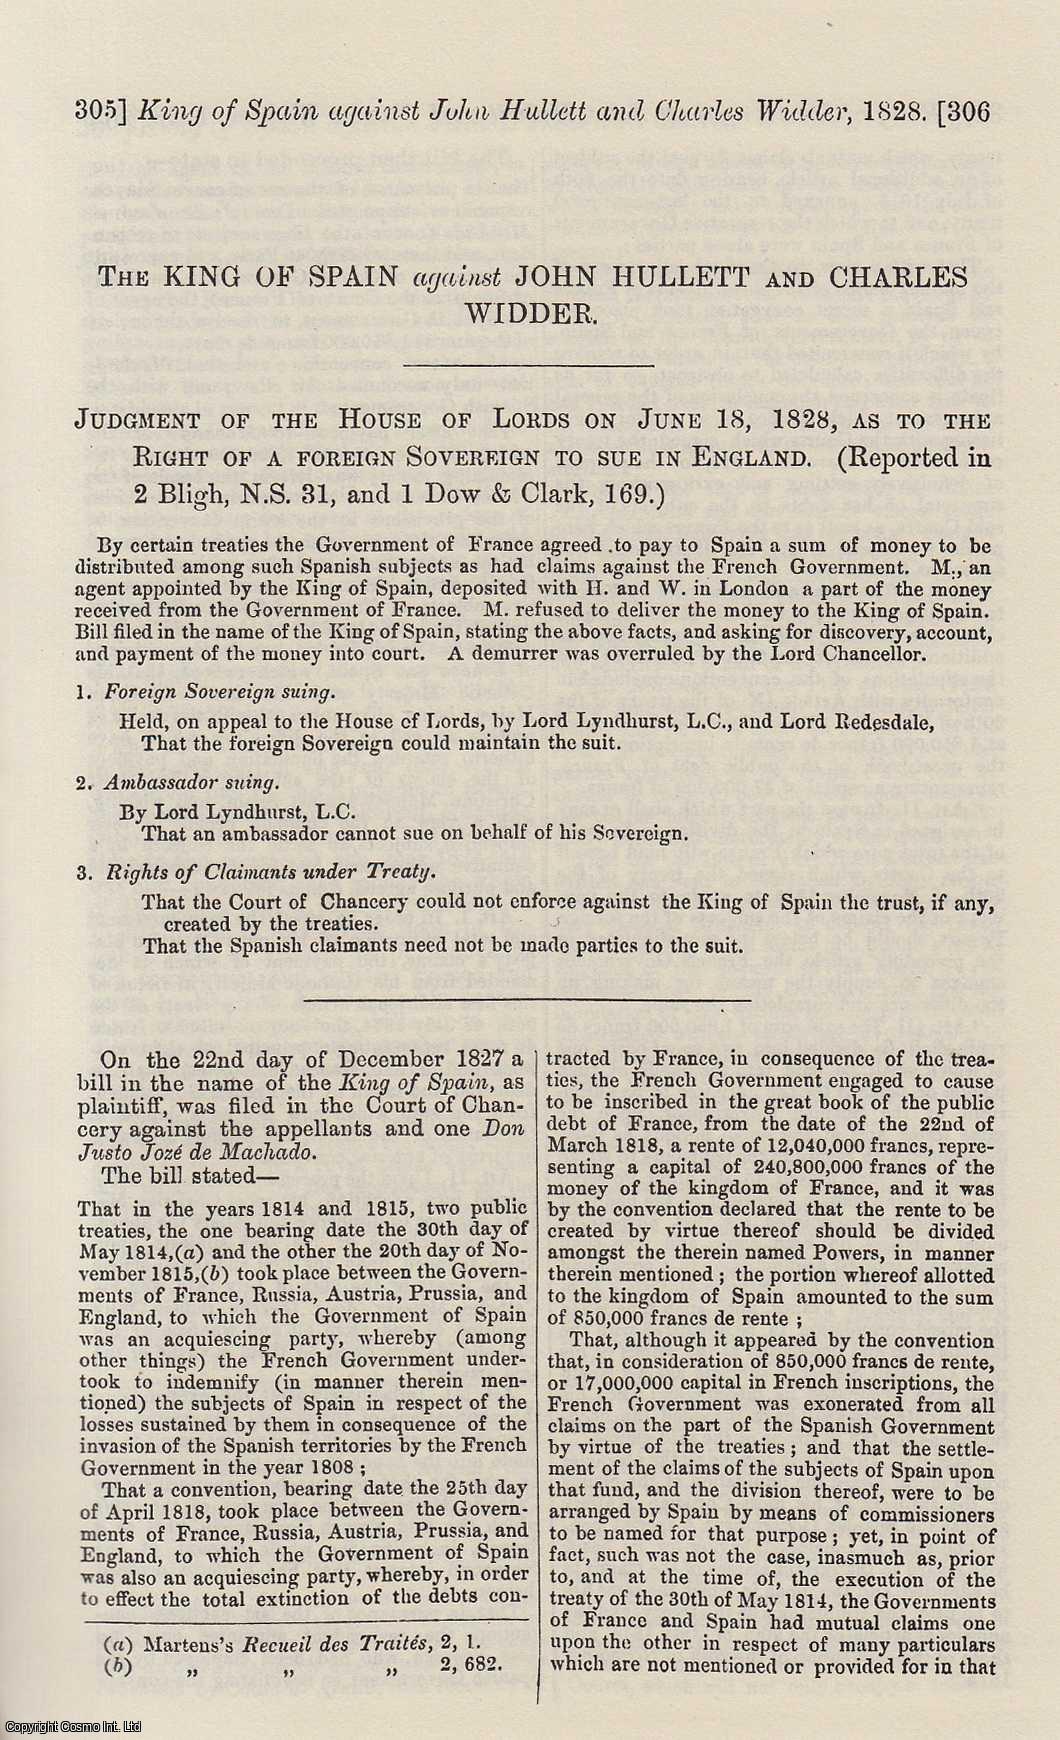 [Trial] - The King of Spain against John Hullett and Charles Widder. Judgement of the House of Lords on June 18, 1828, as to the Right of a Foreign Sovereign to Sue in England. An original printing from the Reports of State Trials.